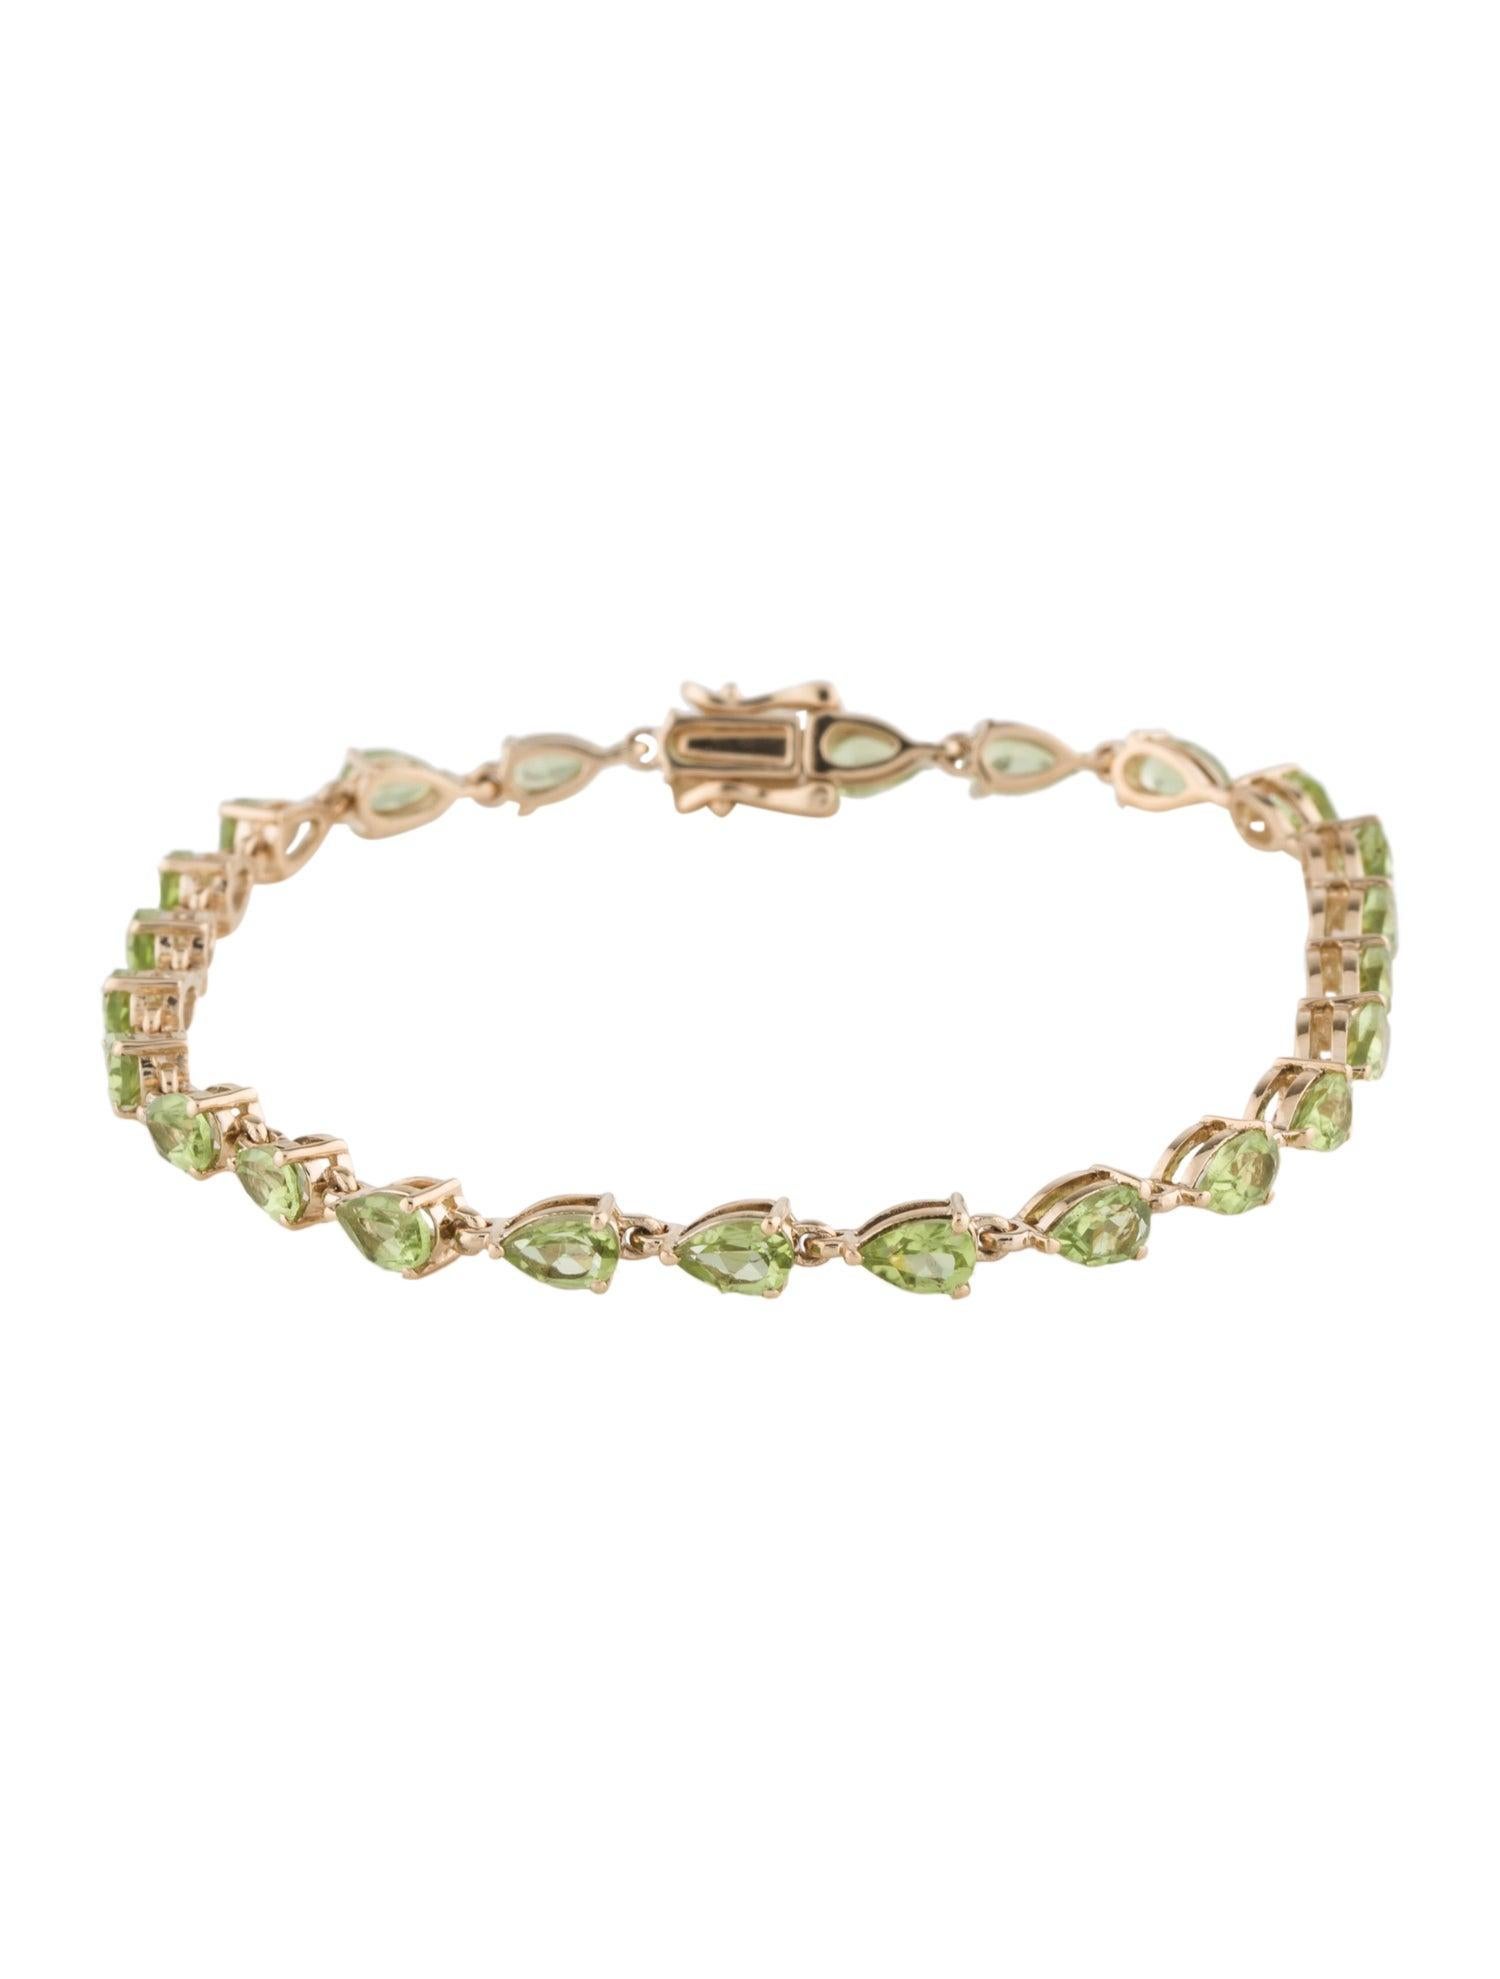 Experience timeless elegance with our 14K Yellow Gold Peridot Link Bracelet, a captivating piece that embodies sophistication and style. This exquisite bracelet features a series of 25 Pear Modified Brilliant Peridots, each masterfully set in